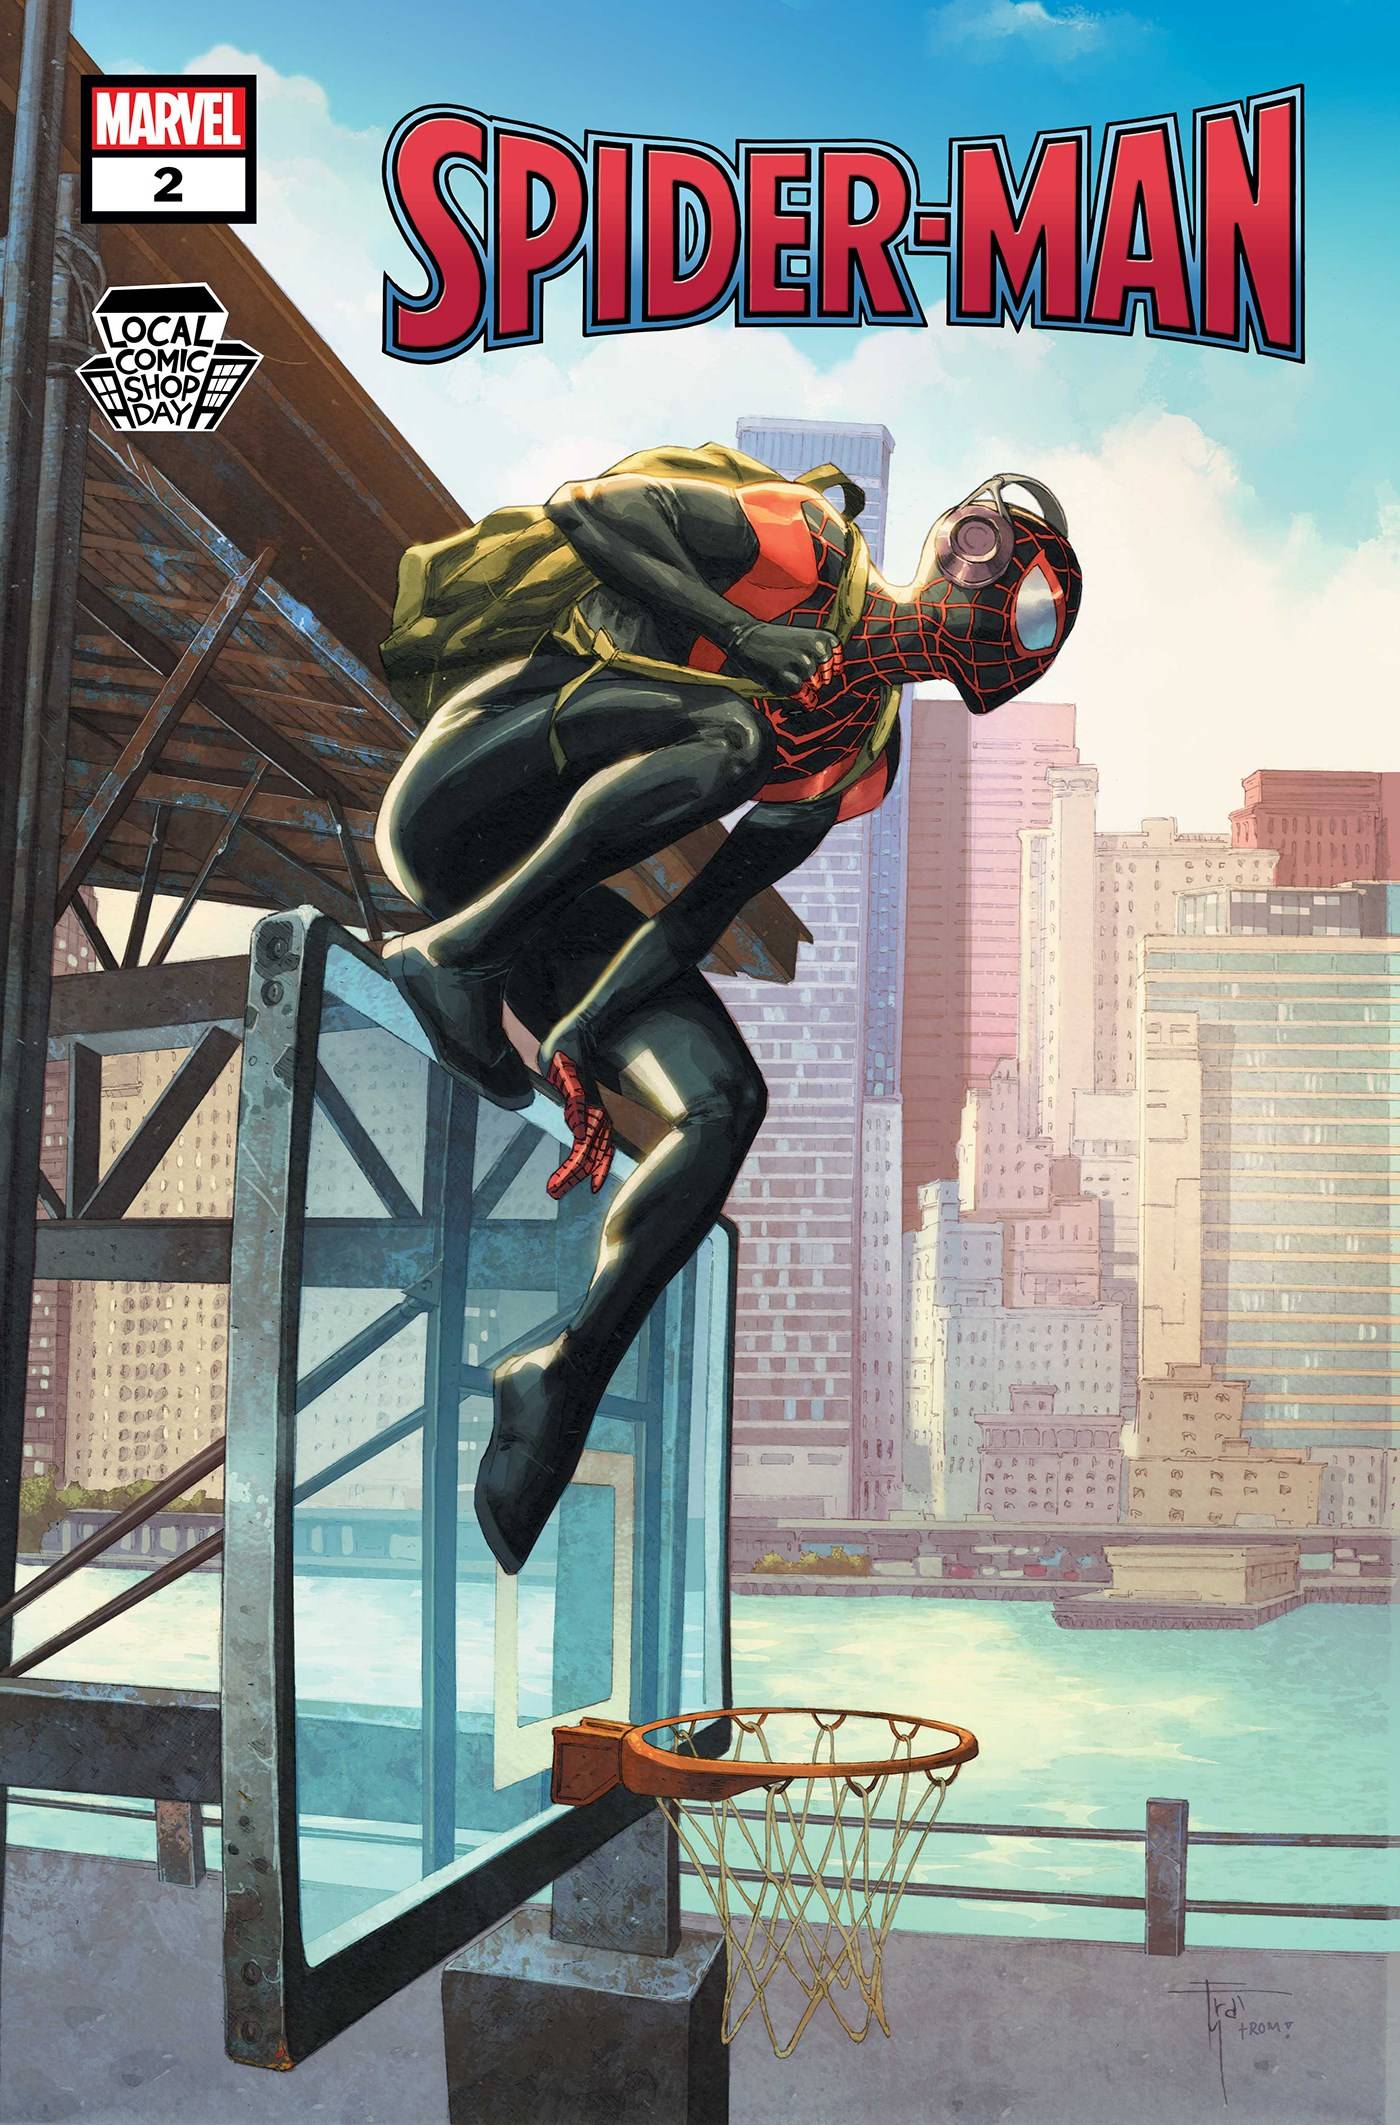 Spider-Man: No Way Home Peter-Two Variant (Timed Edition) Poster